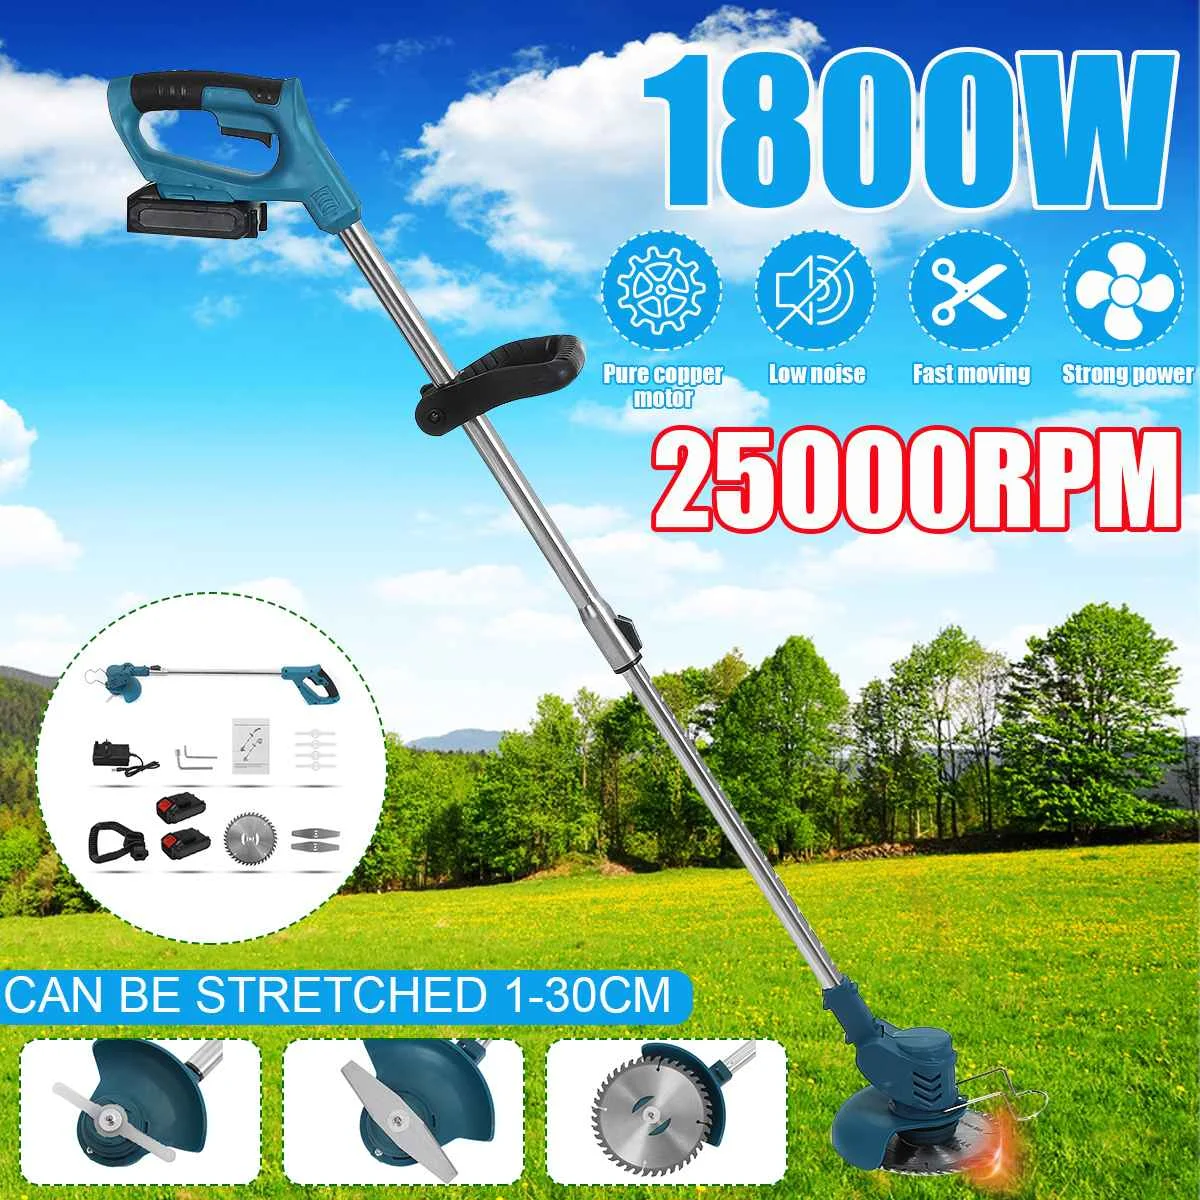 

88V 1800W Portable Grass Hedge Trimmer Cordless Electric Lawn Mower Handheld Adjustable Mowing Machine Garden Tool with Battery